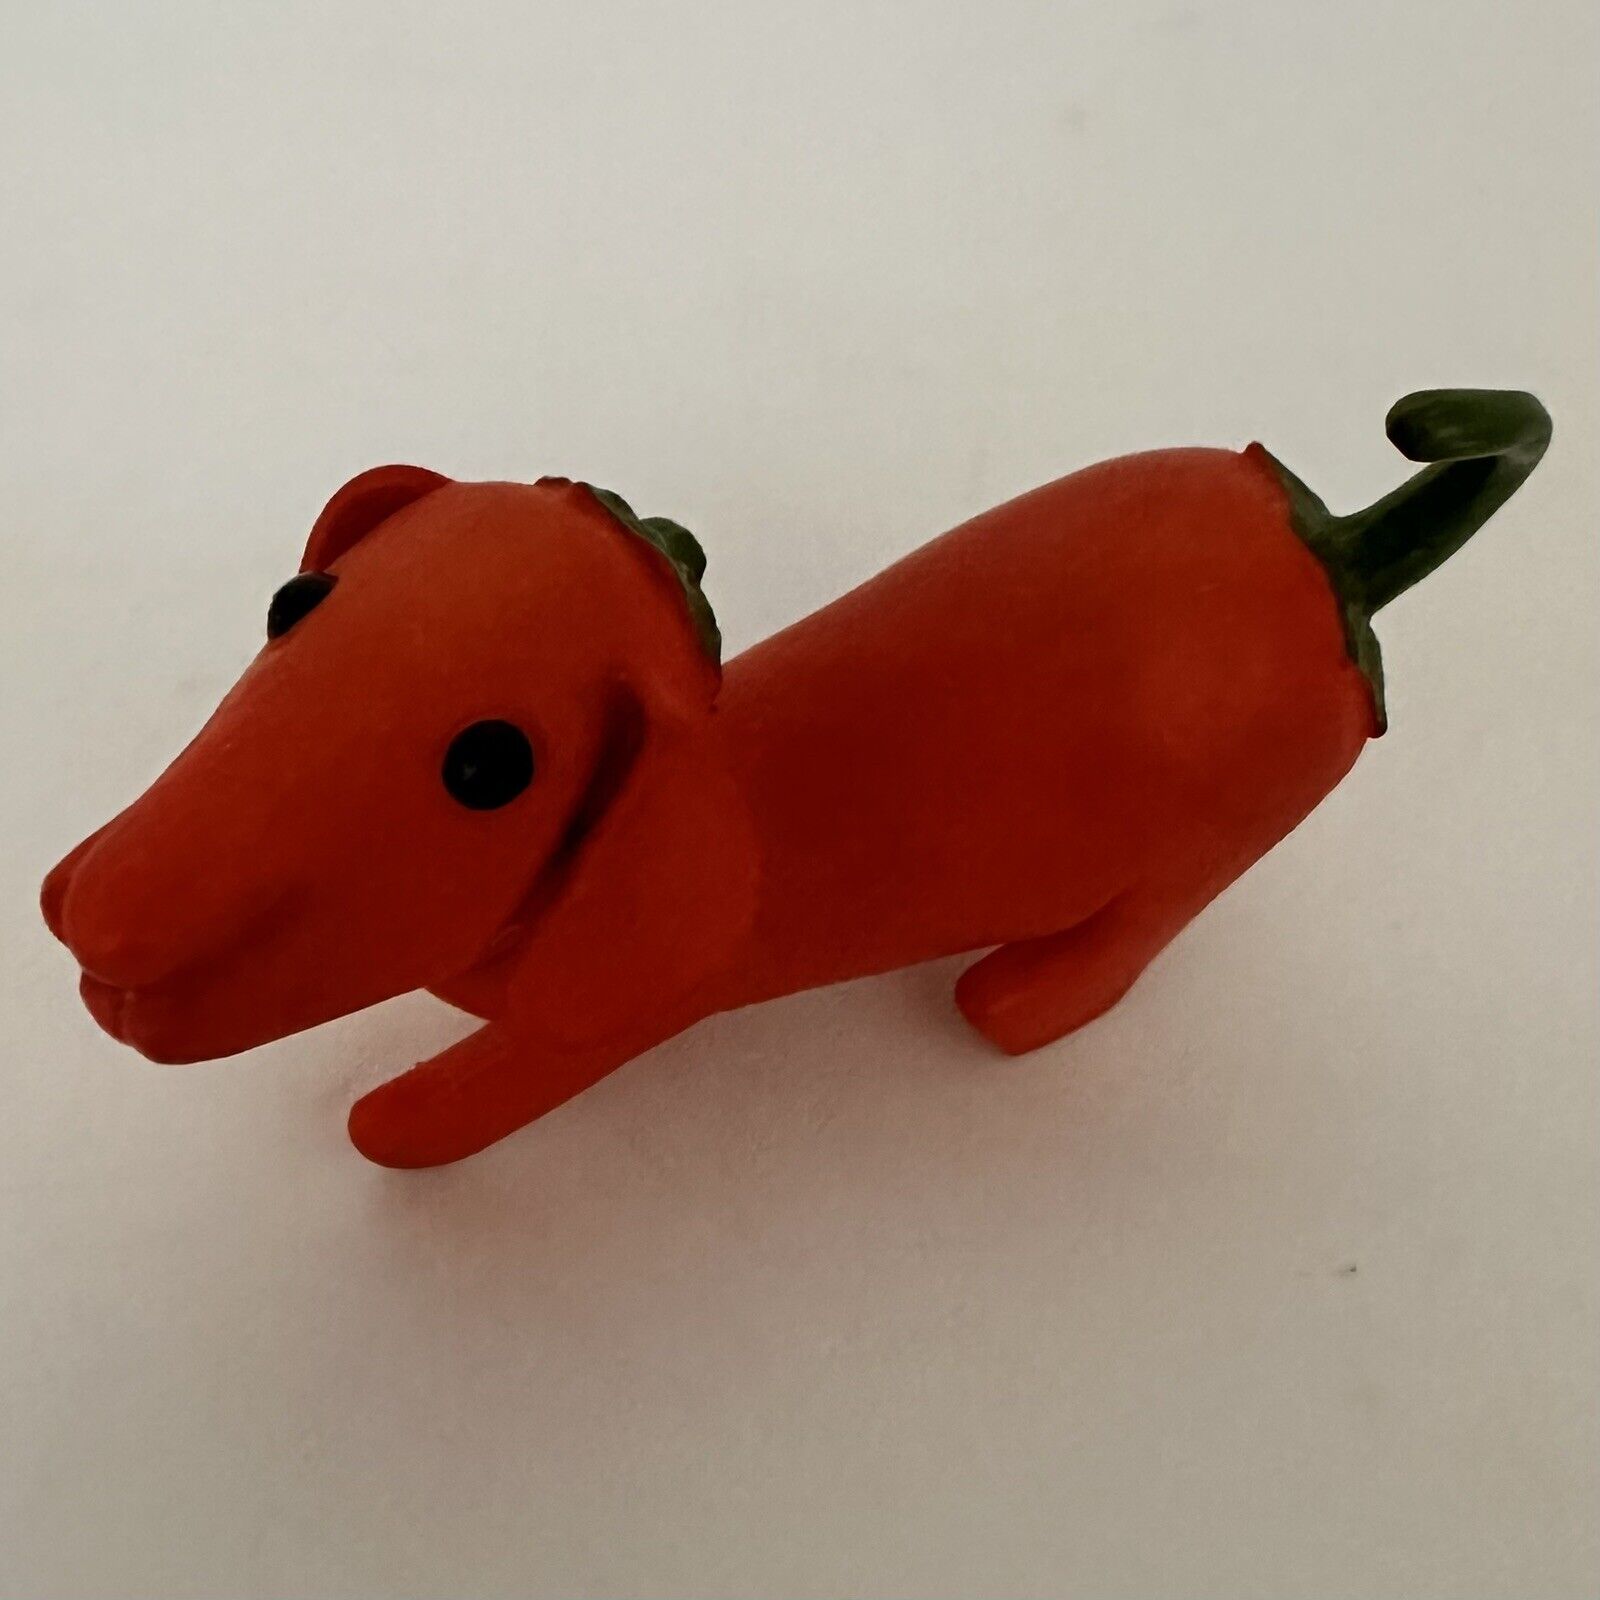 Enesco Home Grown Figurine Red Pepper Dachshund Rare Retired 2008 Collectible